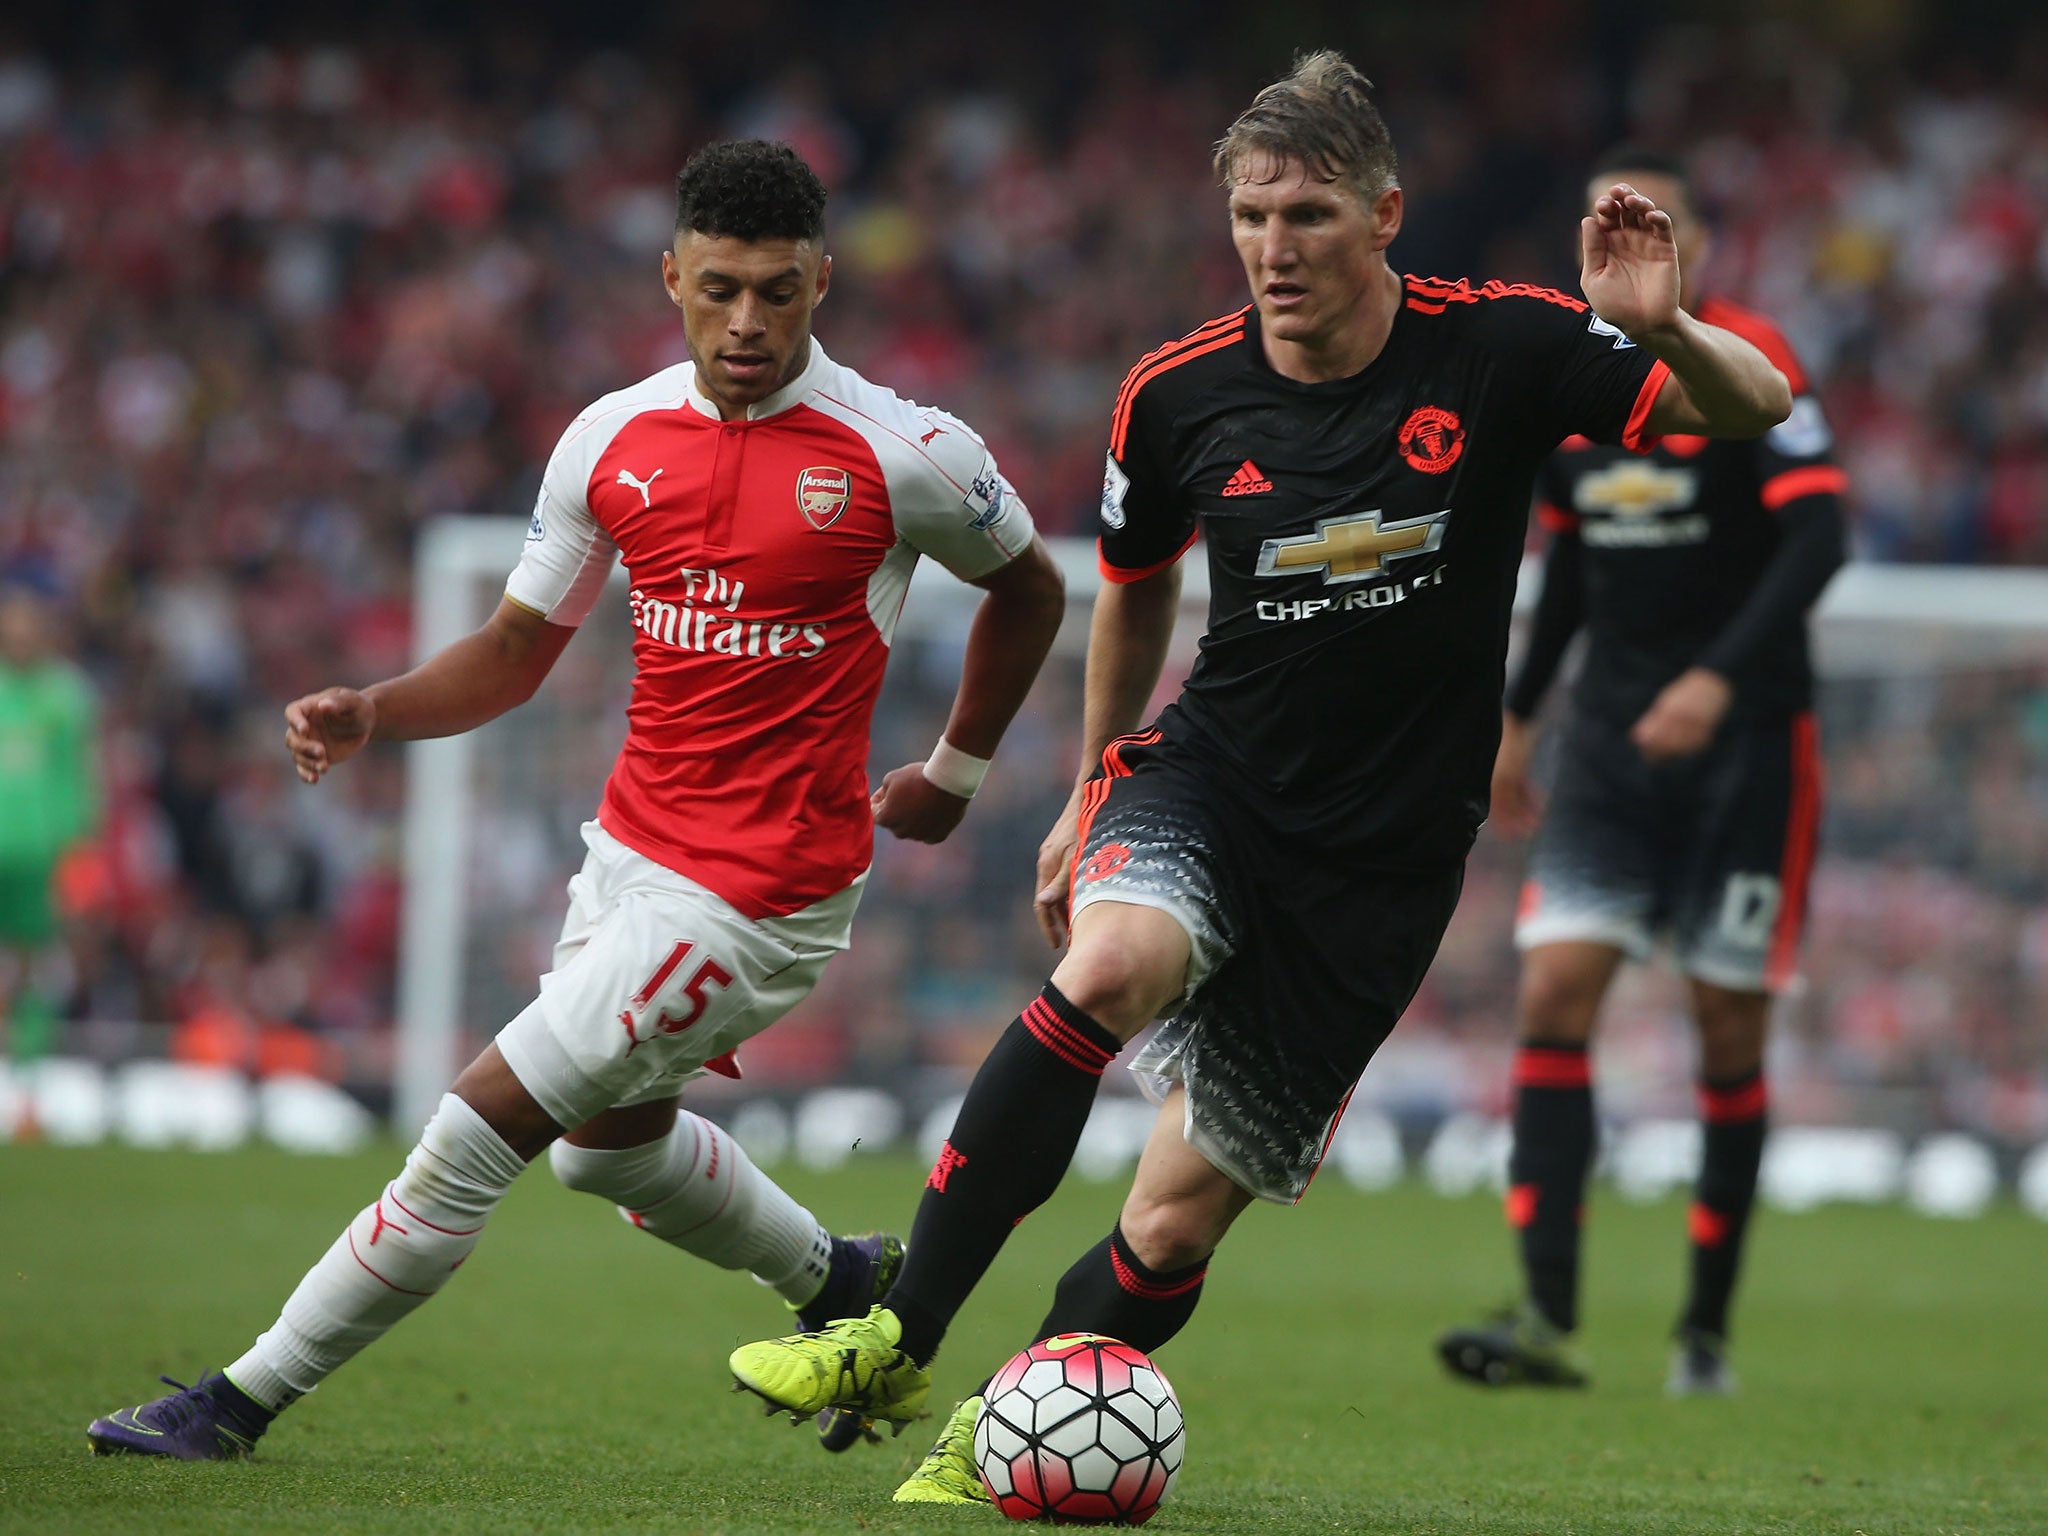 The flaw in Bastian Schweinsteiger’s attacking approach was exposed in United’s last game by the pace of Arsenal’s Theo Walcott